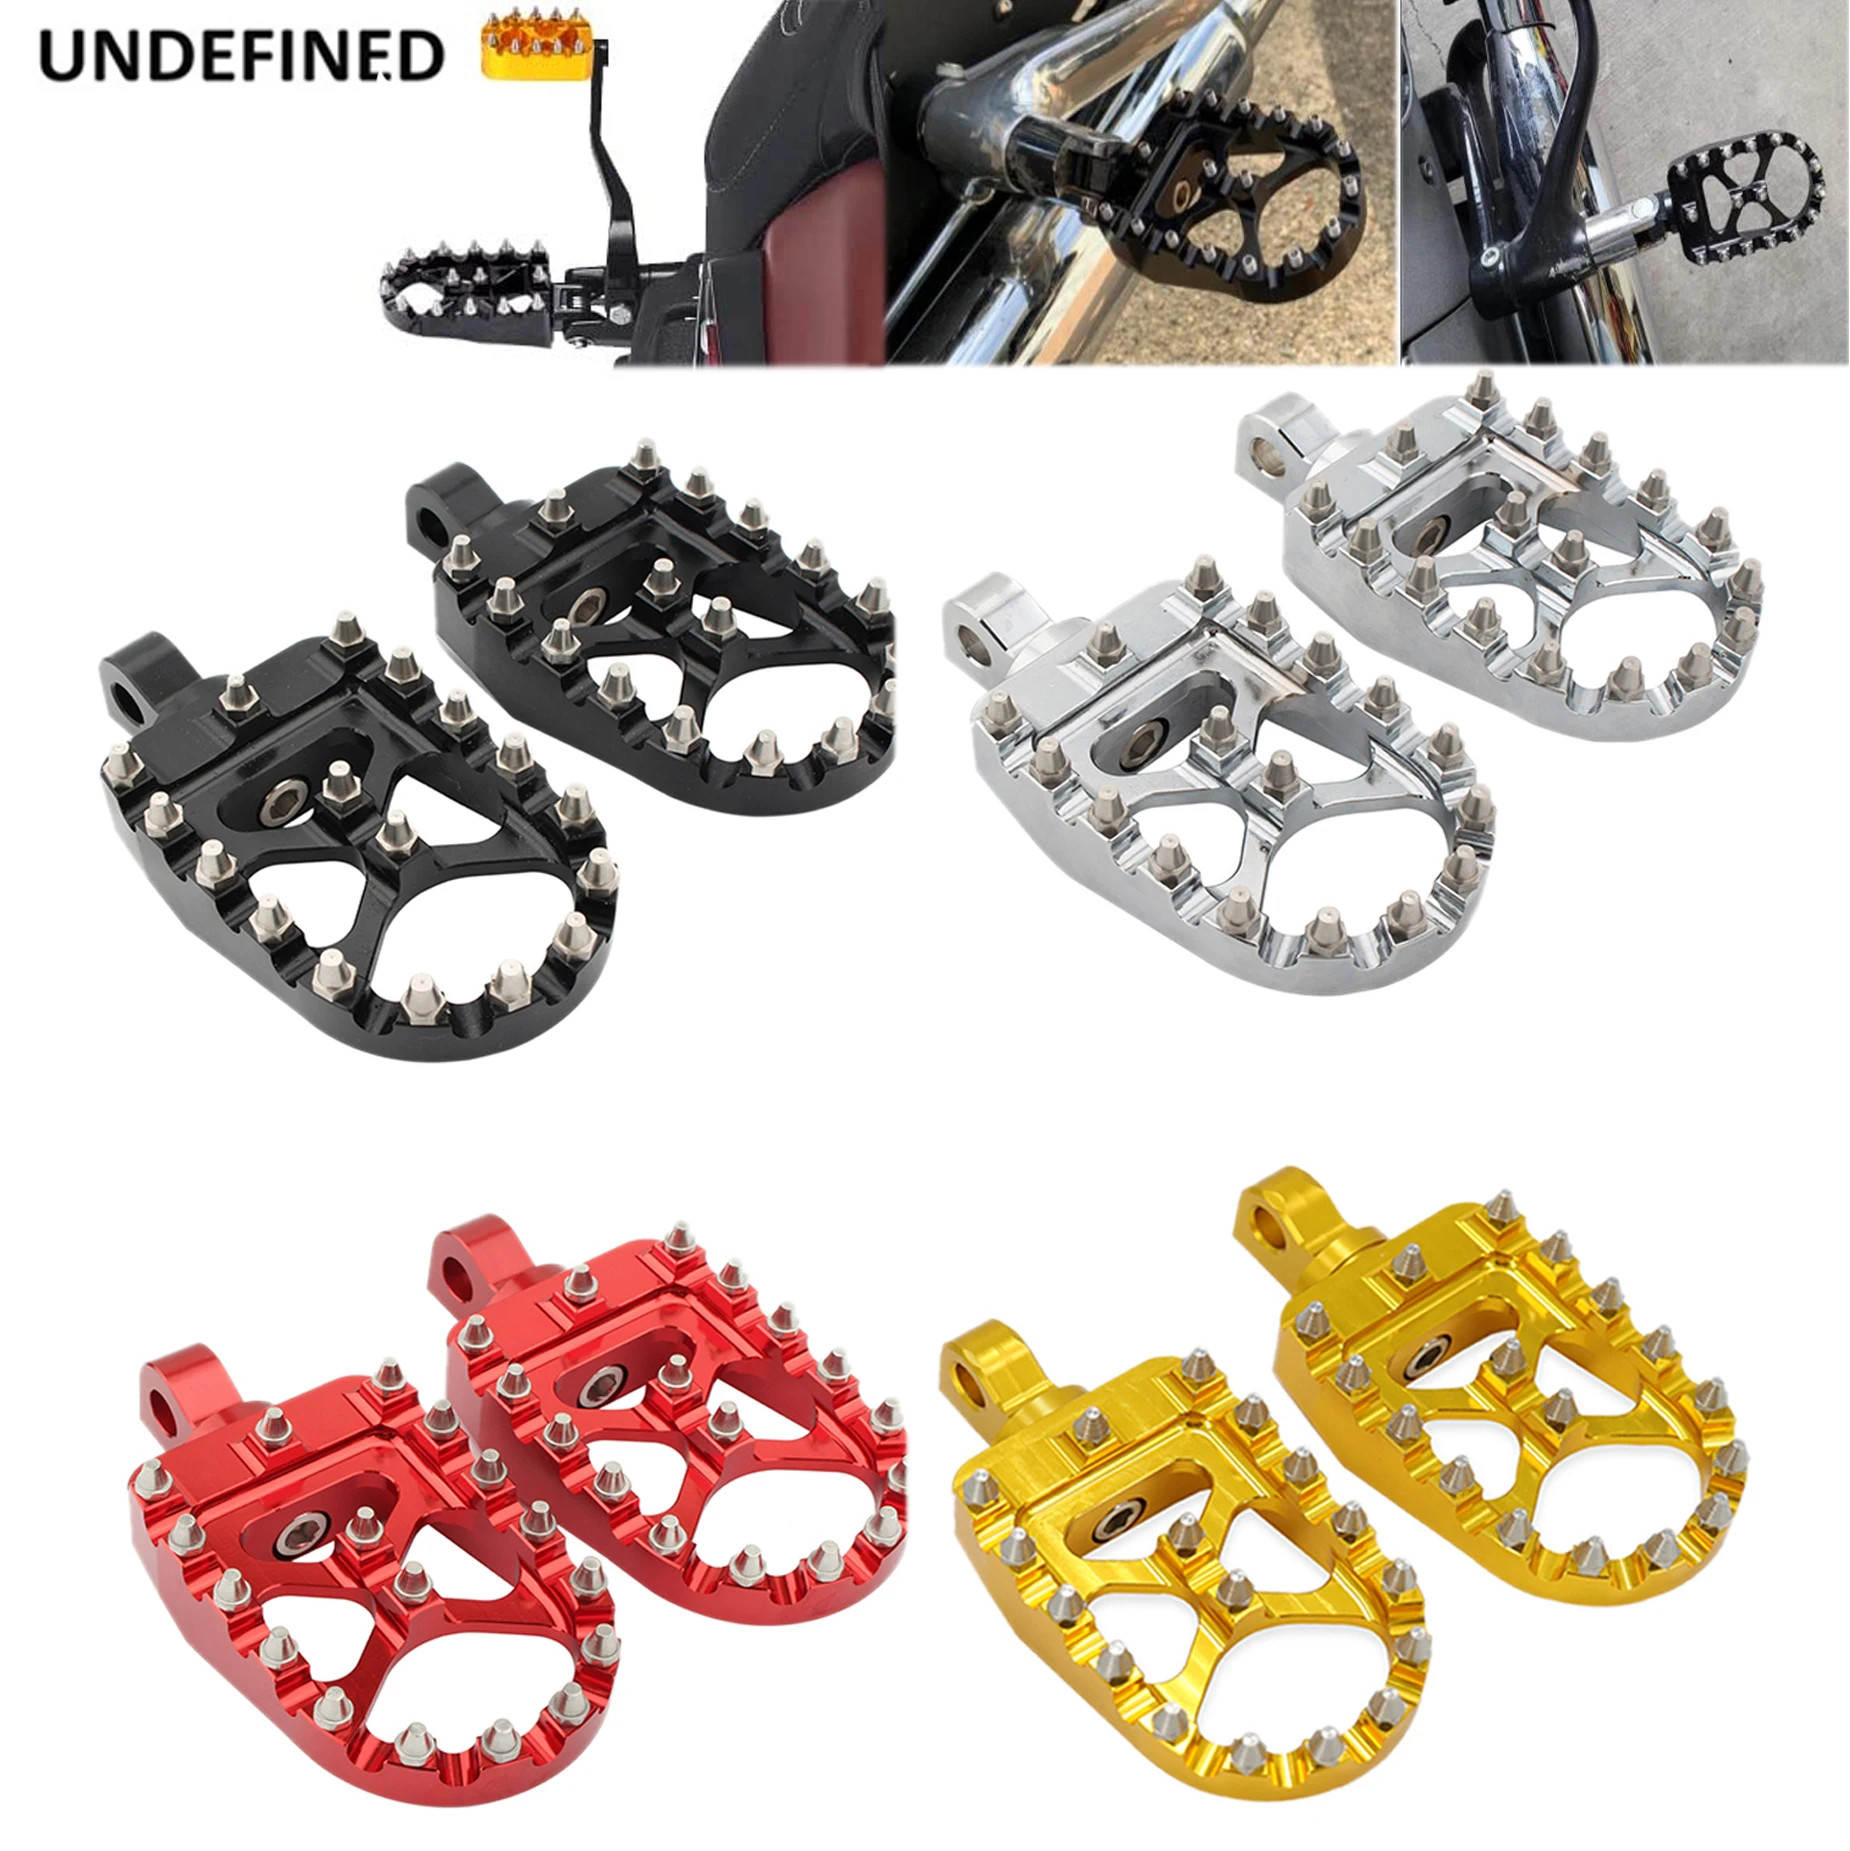 

MX Wide Foot Pegs Front Rear Footrests for Harley Touring Electra Road Glide Softail Fatboy Street Bob Dyna Sportster Iron 883